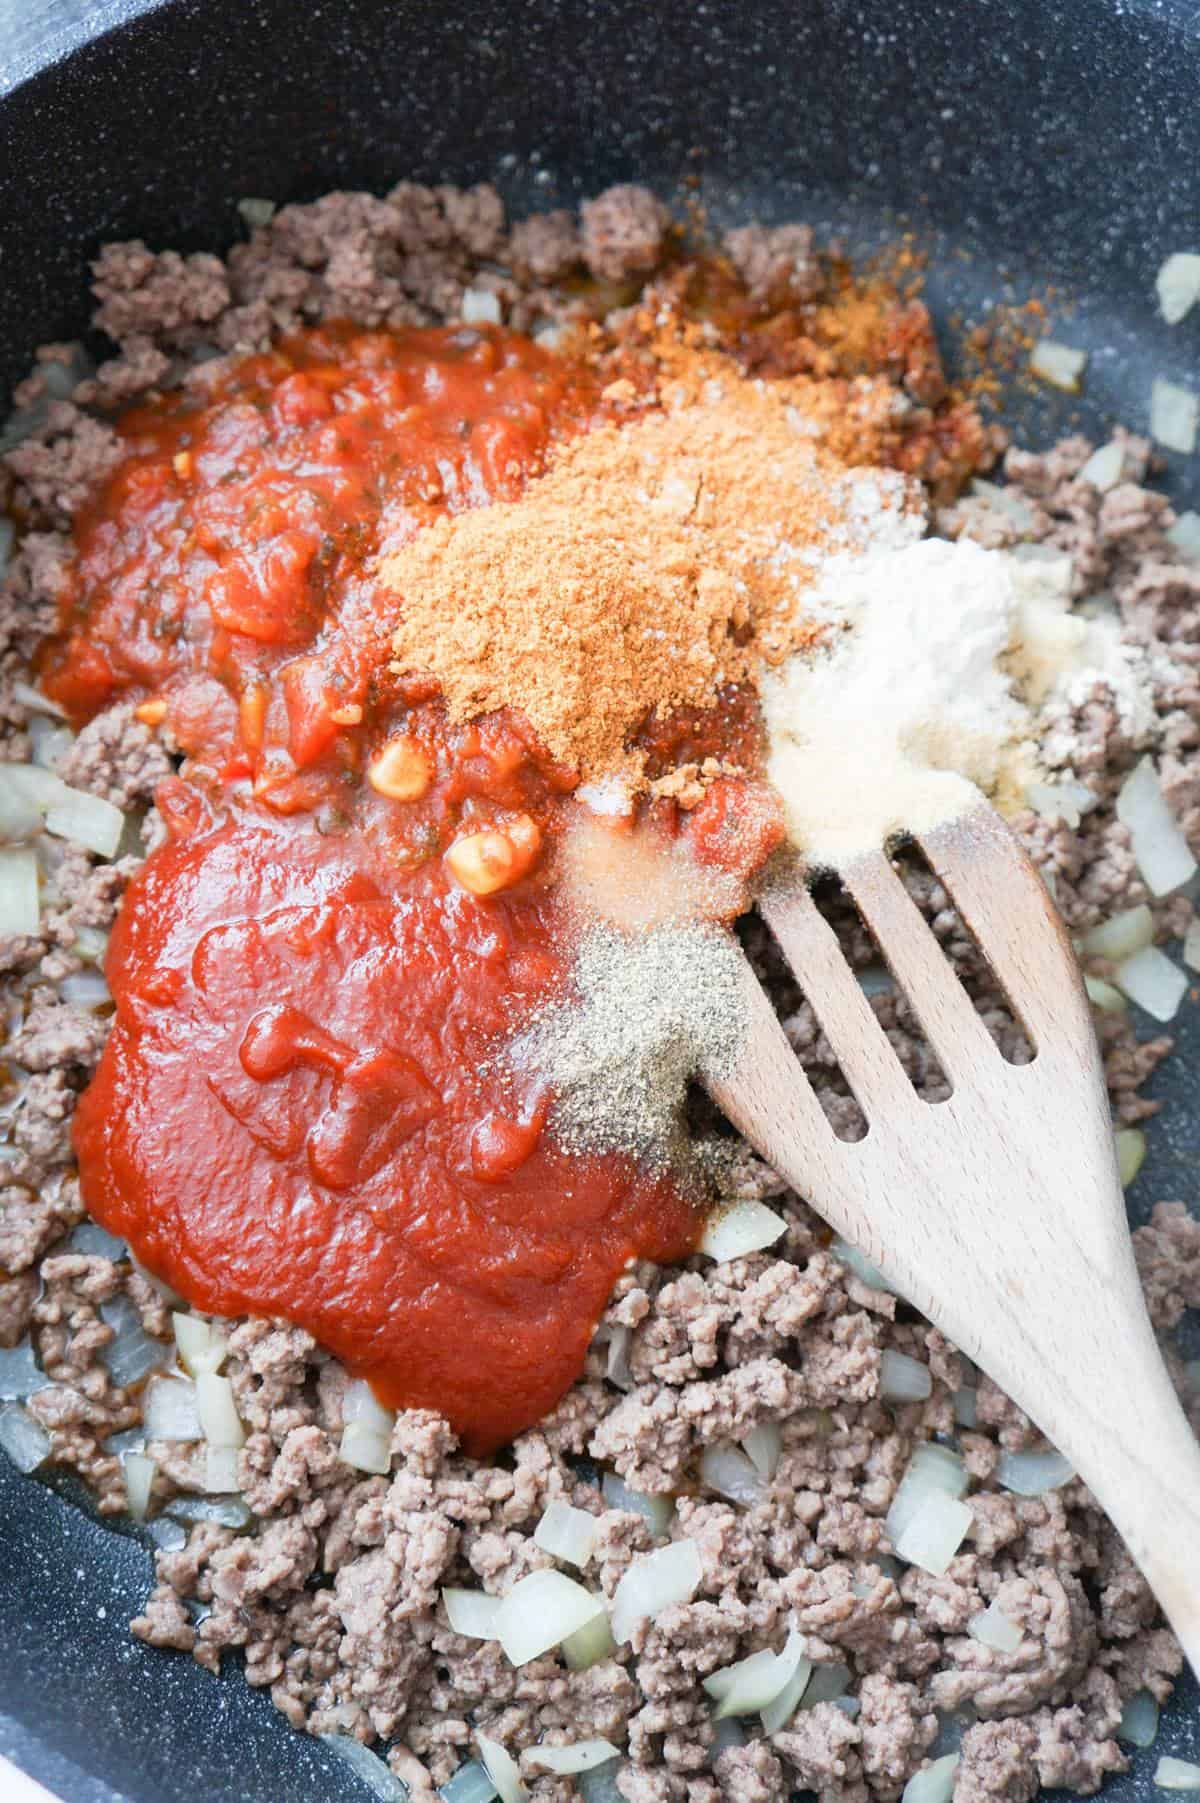 spices, salsa and chili sauce on top of cooked ground beef in a saute pan